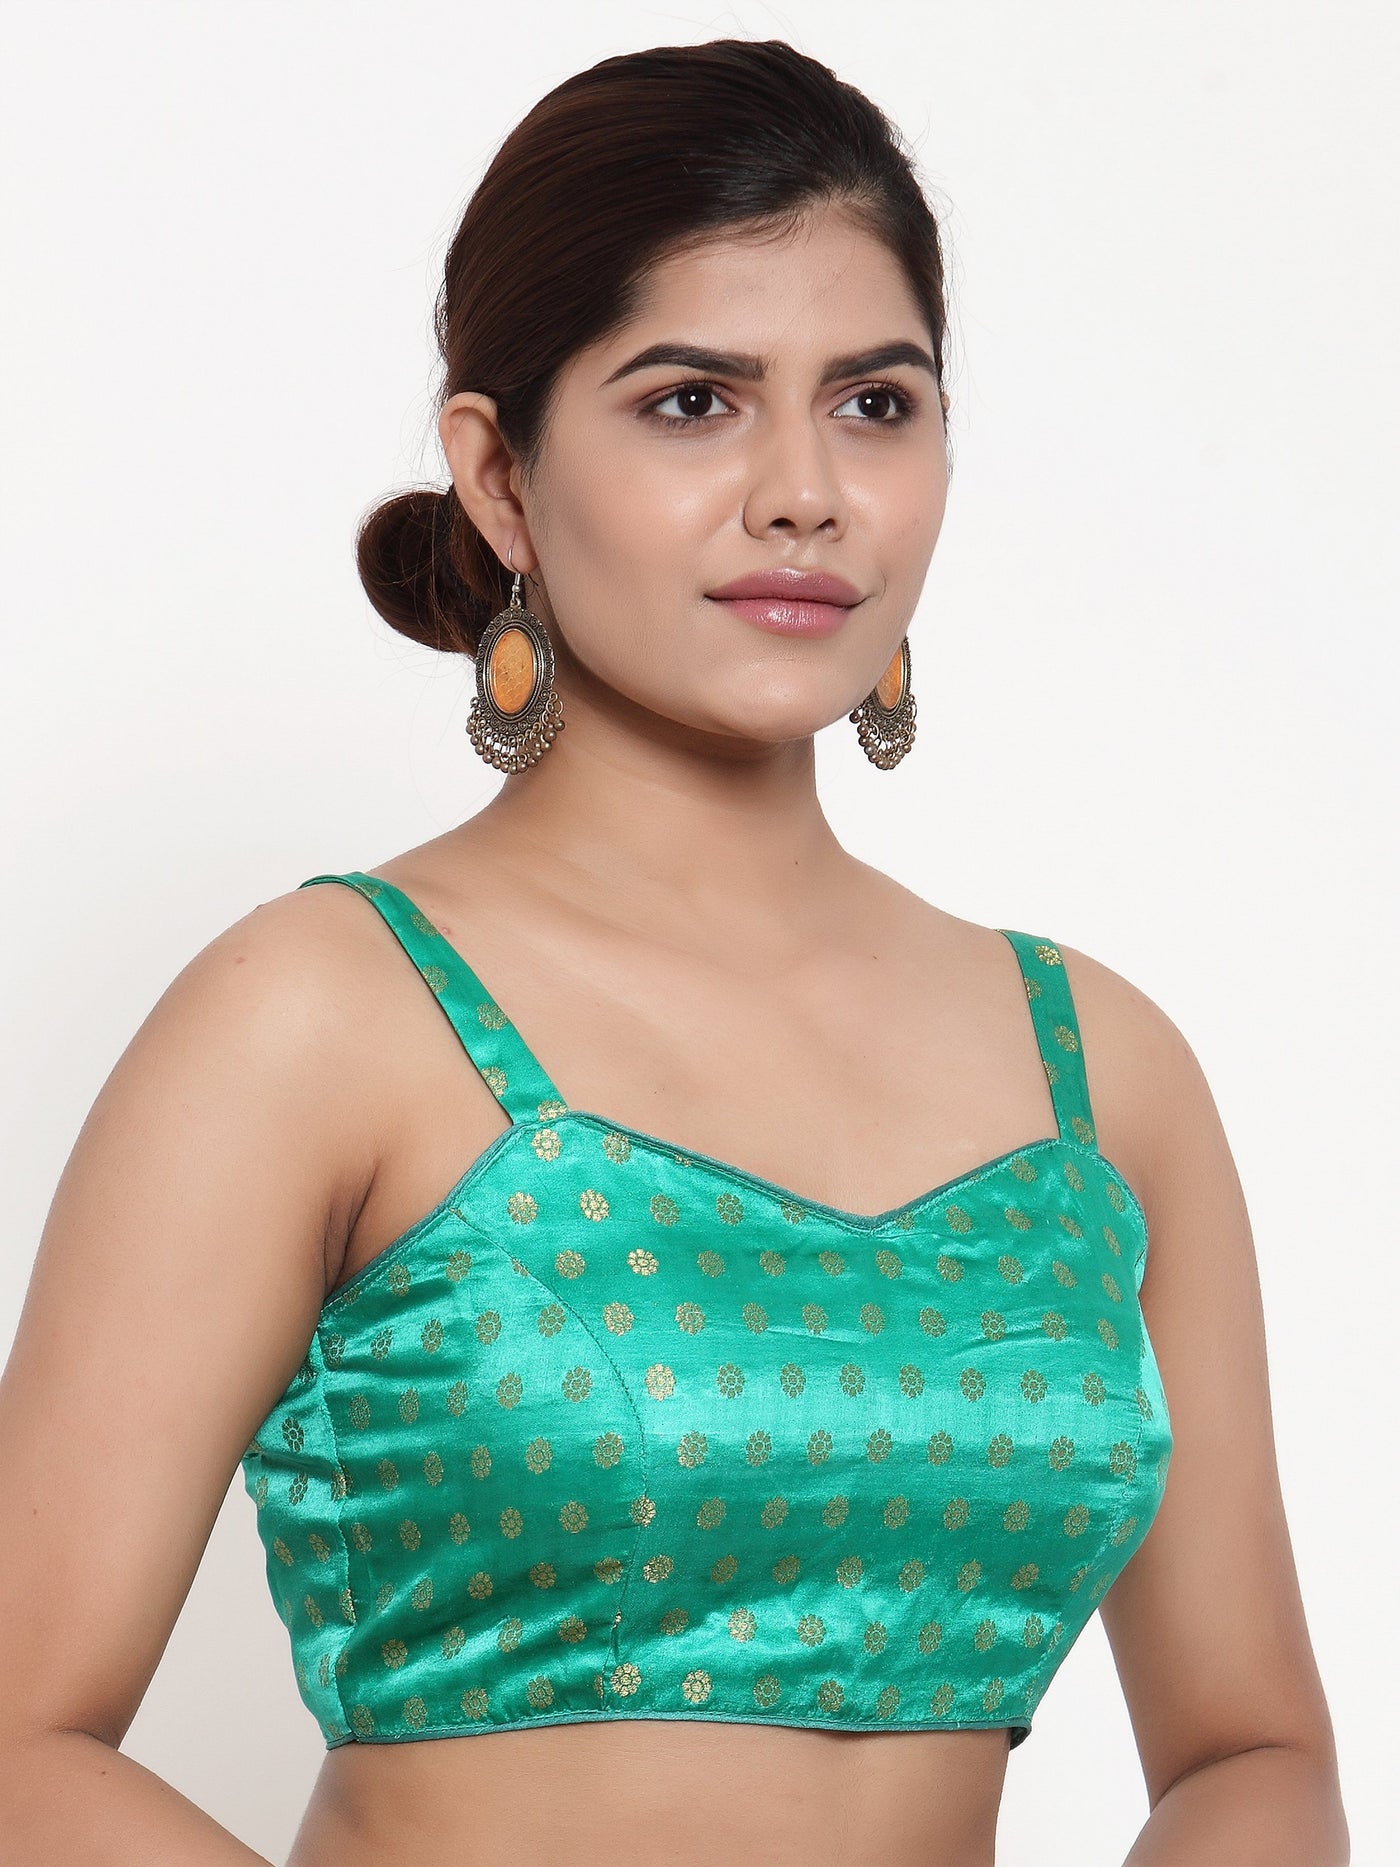 Saree Blouse Top in Strap Style with Low Cut Back and Embroidery - Indian Clothing in Denver, CO, Aurora, CO, Boulder, CO, Fort Collins, CO, Colorado Springs, CO, Parker, CO, Highlands Ranch, CO, Cherry Creek, CO, Centennial, CO, and Longmont, CO. Nationwide shipping USA - India Fashion X